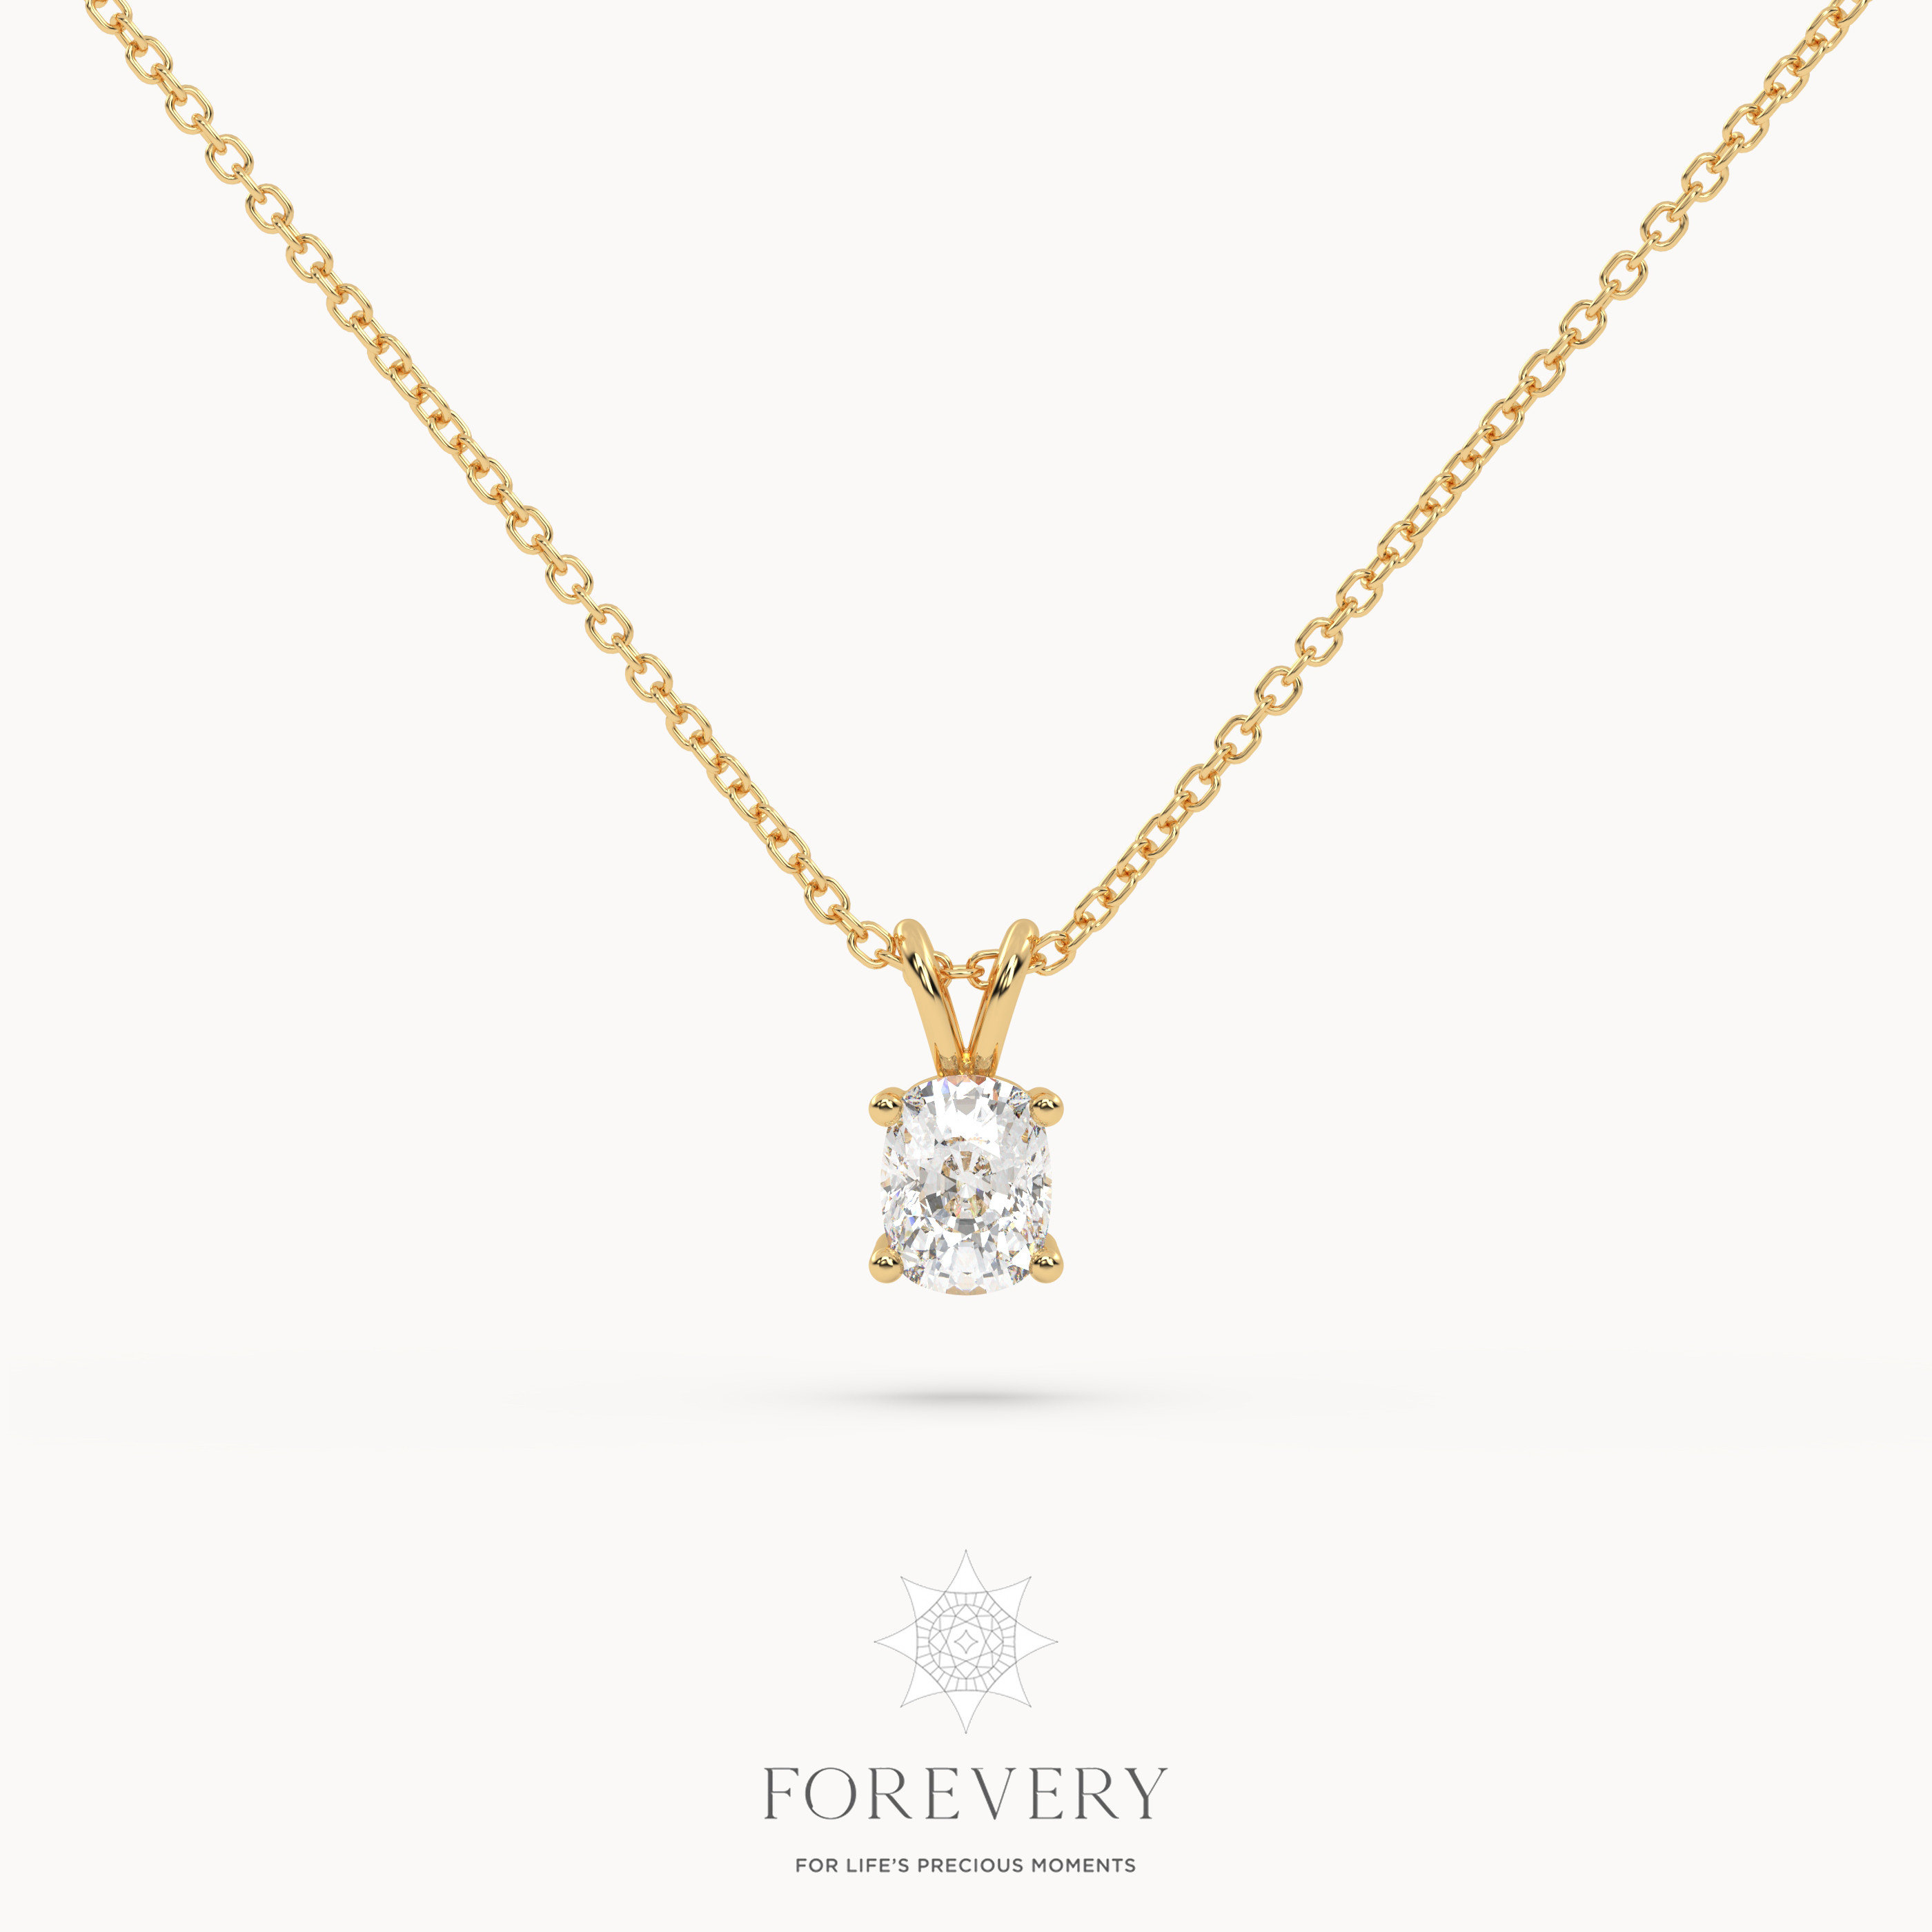 18K YELLOW GOLD Punto Luc Necklace with Cushion Cut Diamond